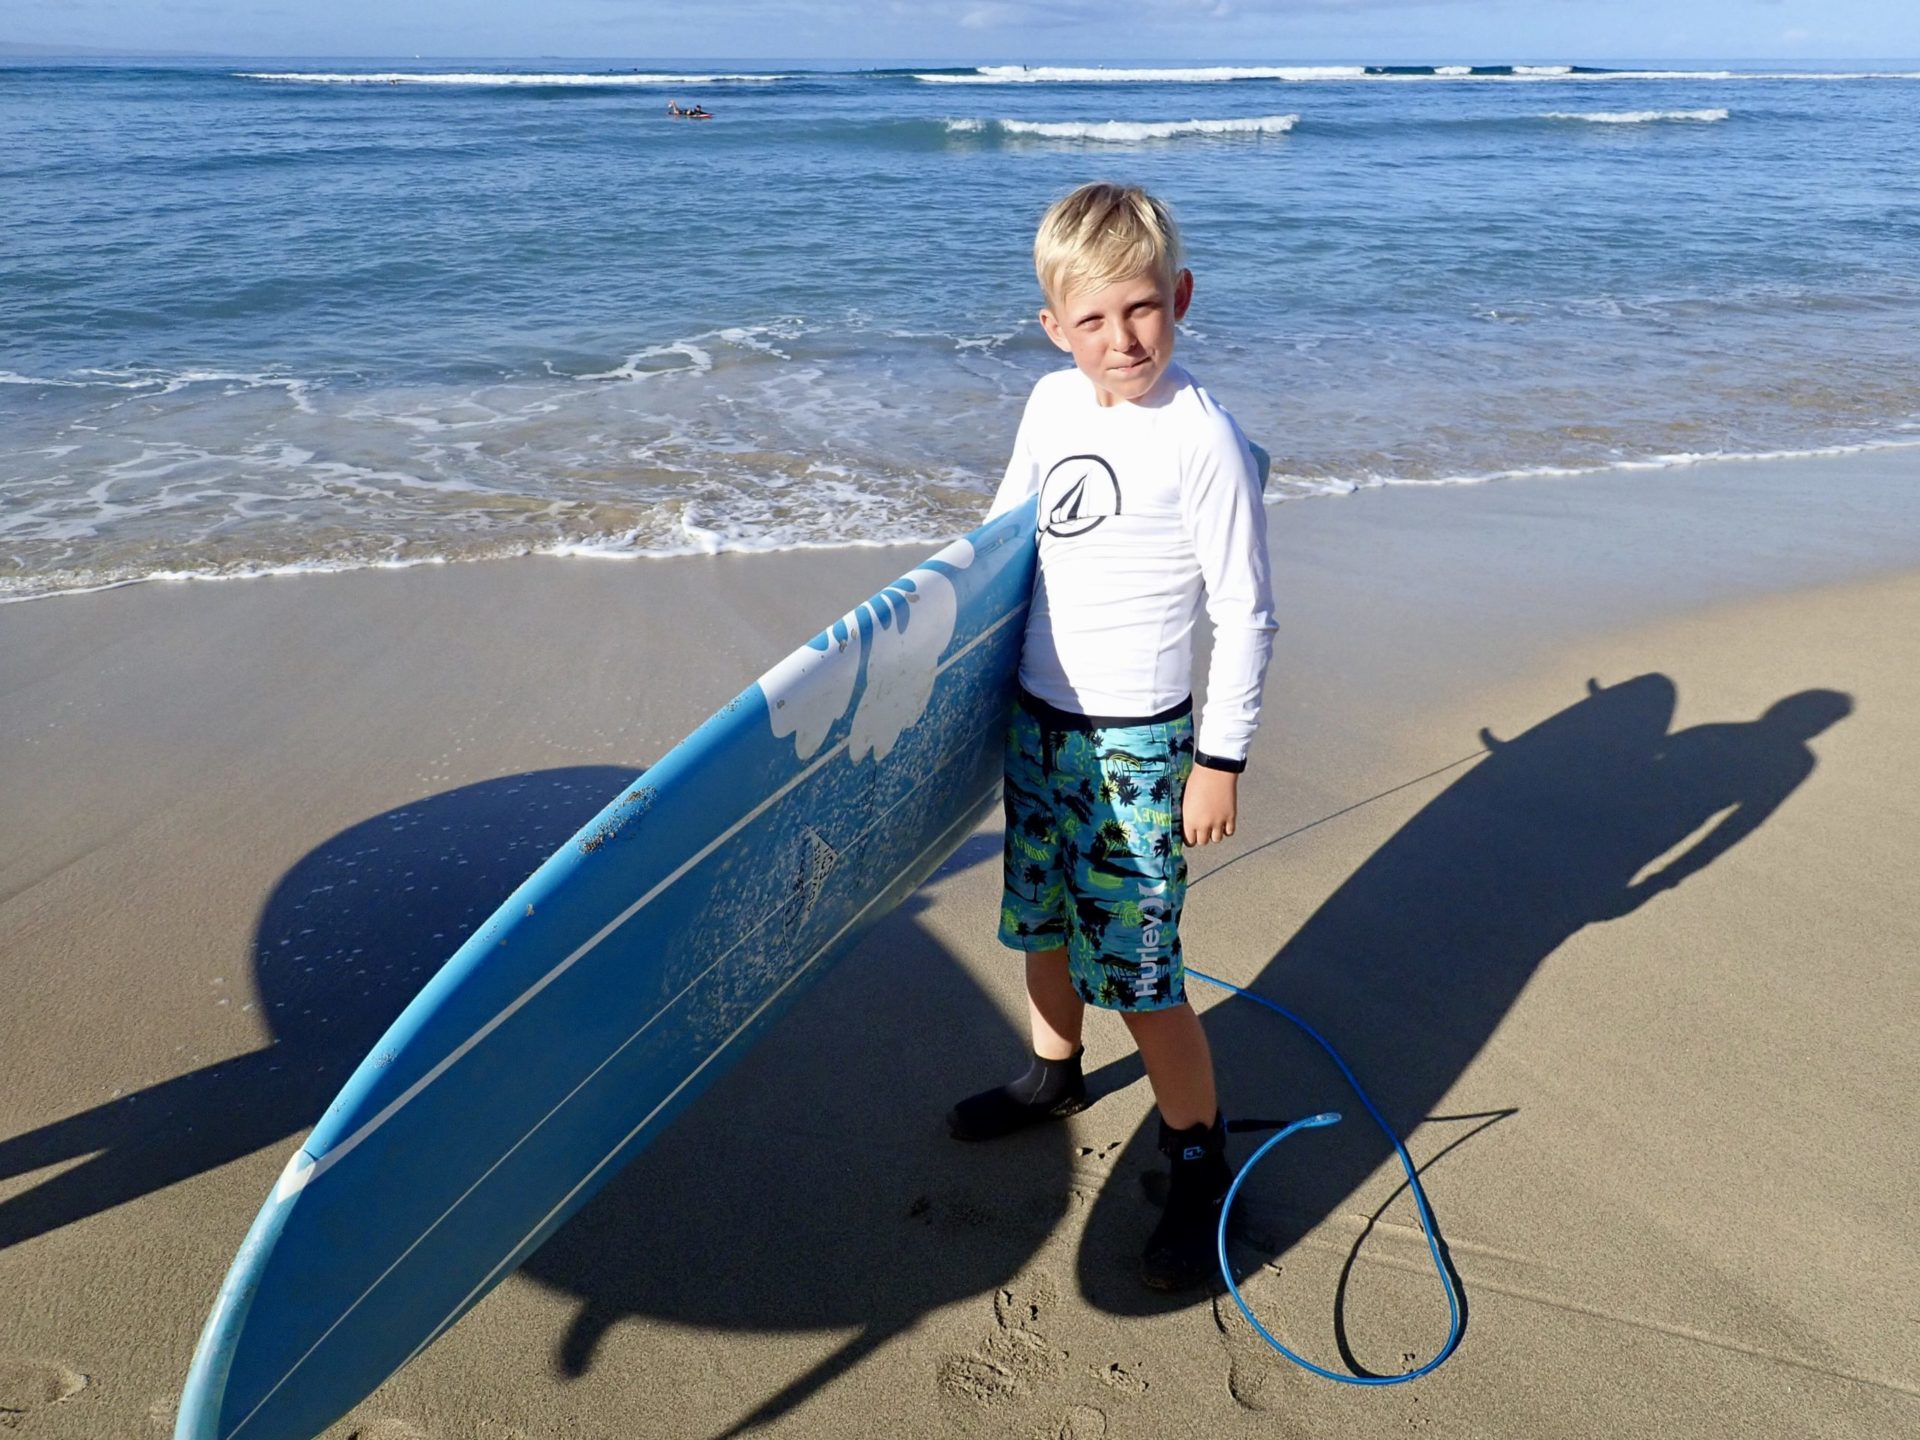 WHAT DO YOU LEARN TAKING SURF LESSONS